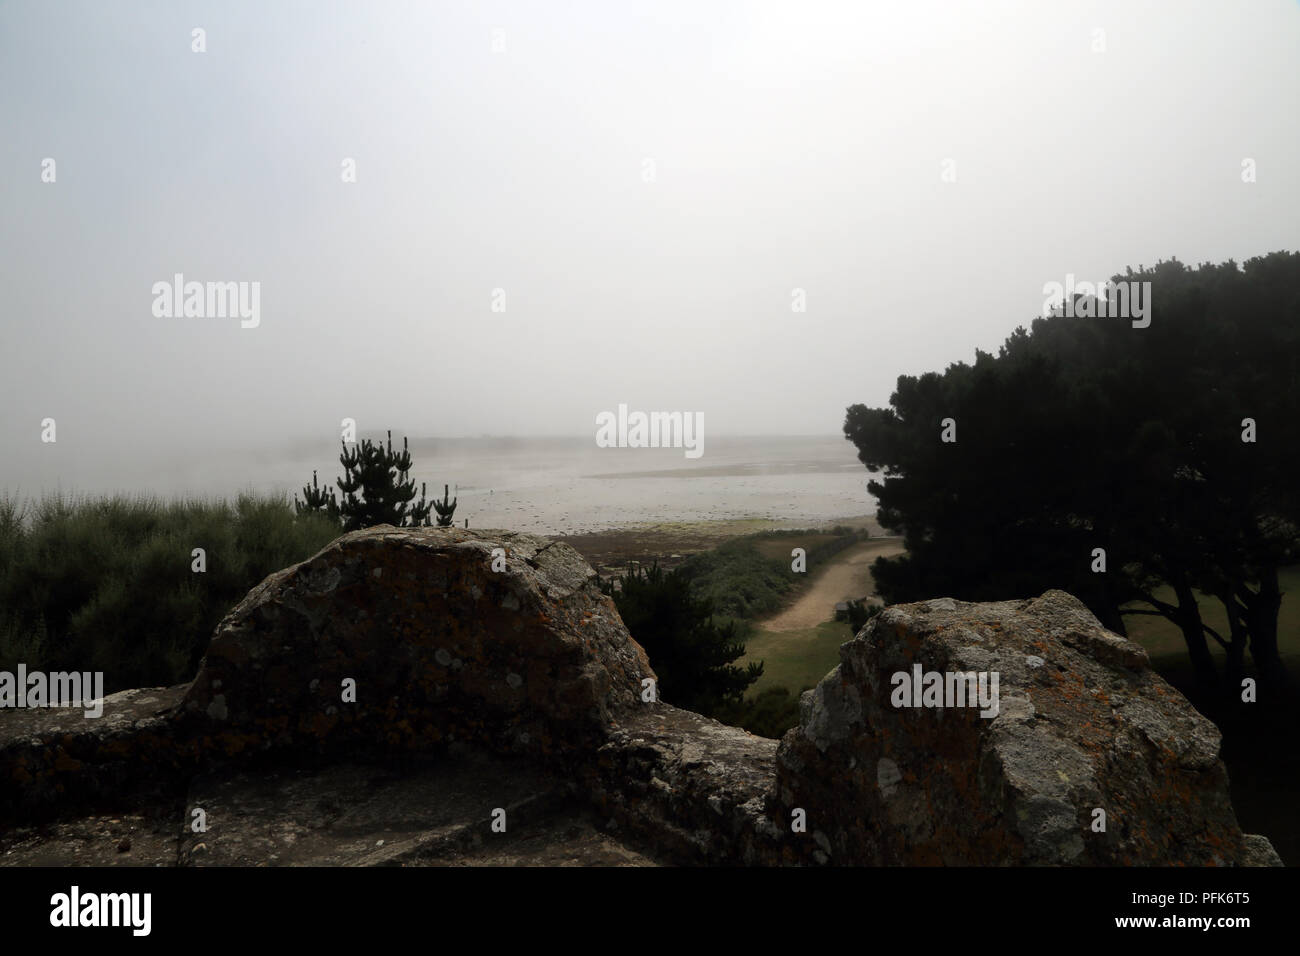 Mist and view from Ilot Sainte Anne, St Pol de Leon, Finistere, Brittany, France Stock Photo